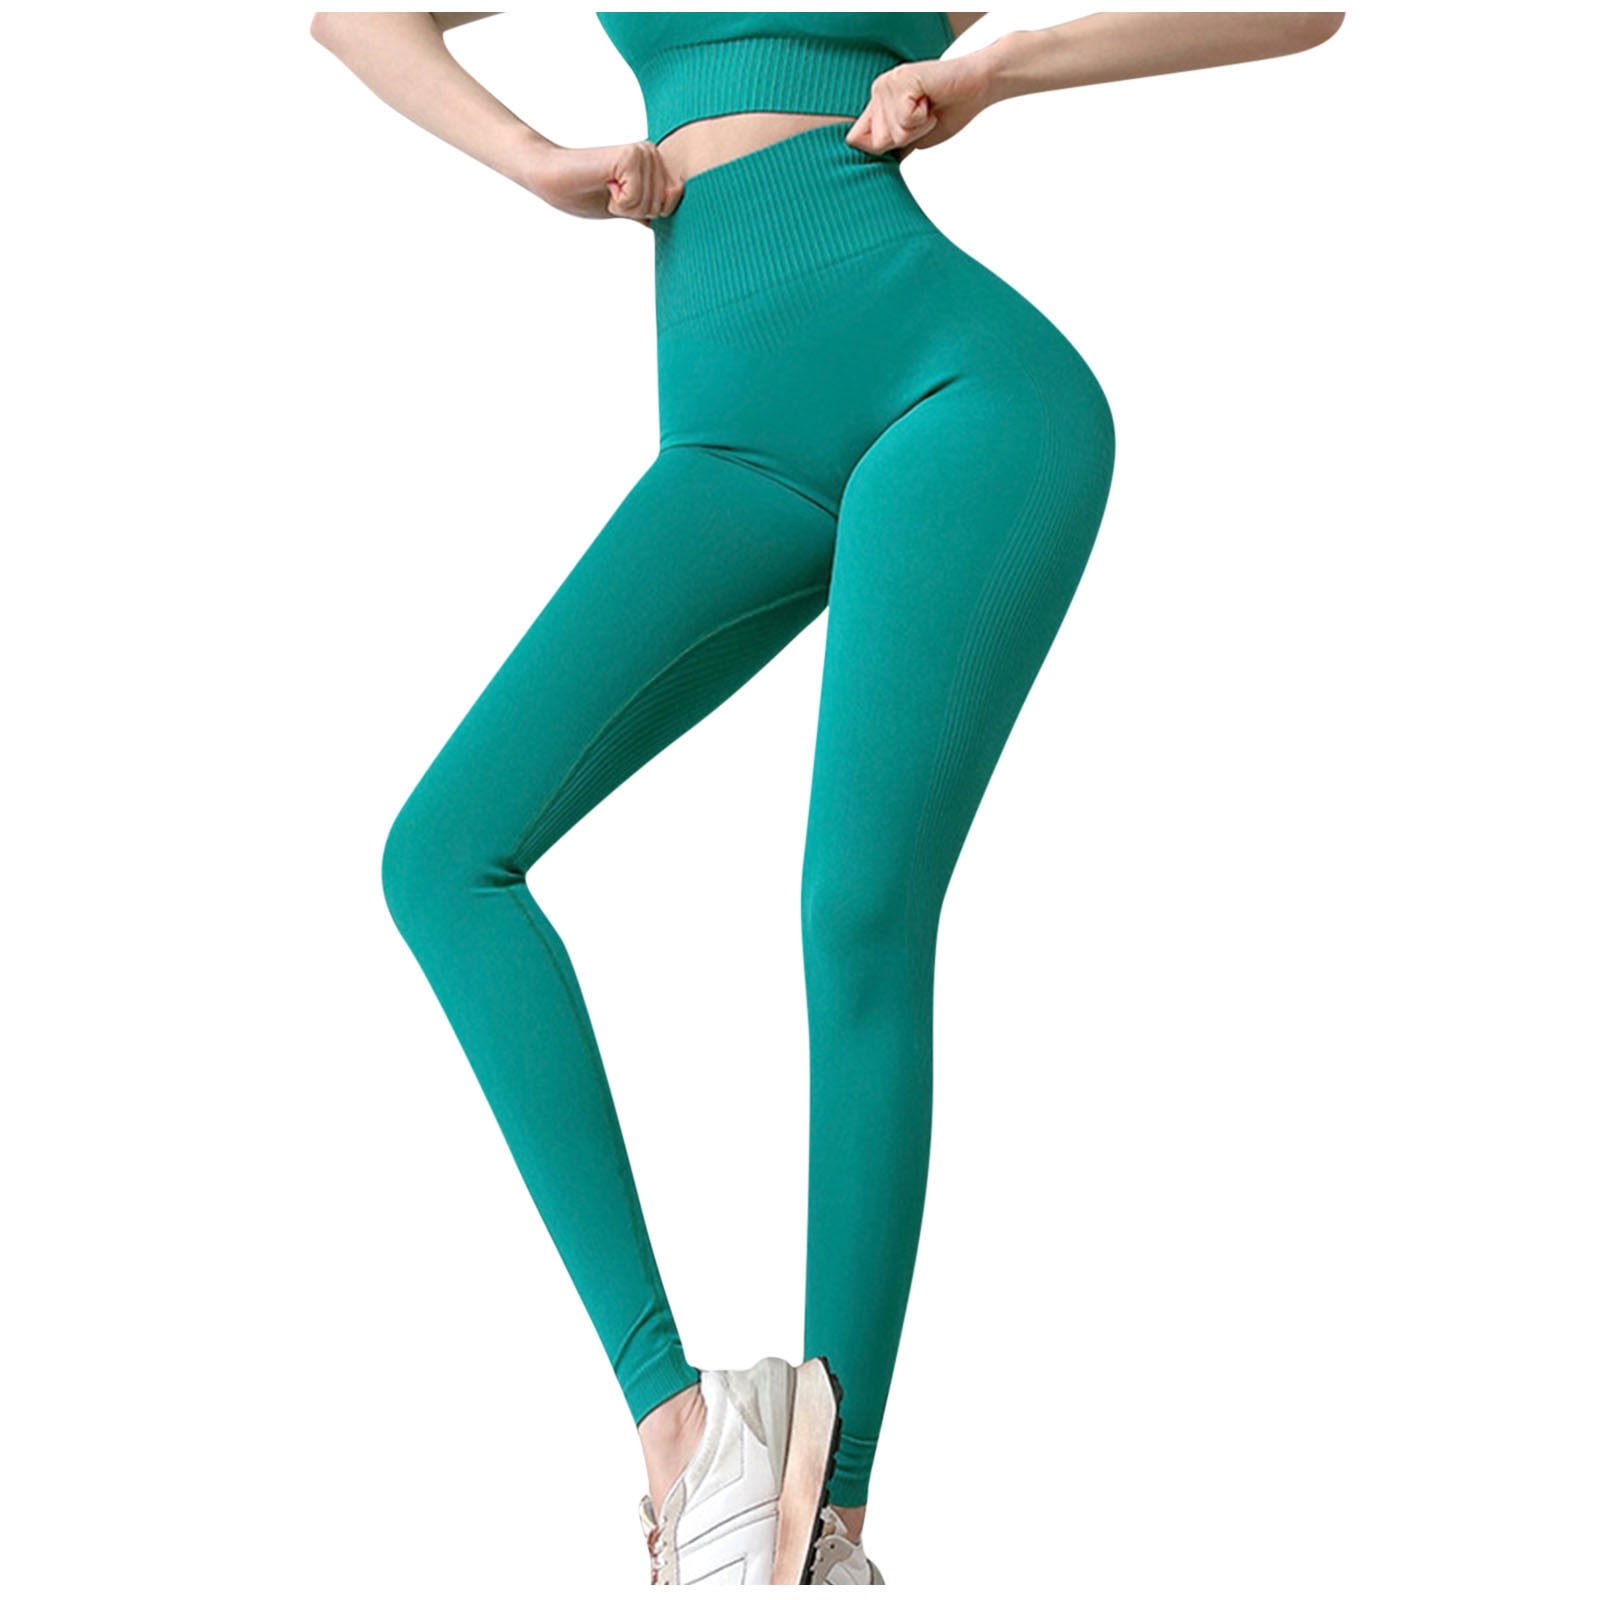 Jalioing Yoga Leggings for Women High Waist Solid Color Ribbed Side Leg  Stretchy Skinny Comfy Athletic Pants (Medium, Green)